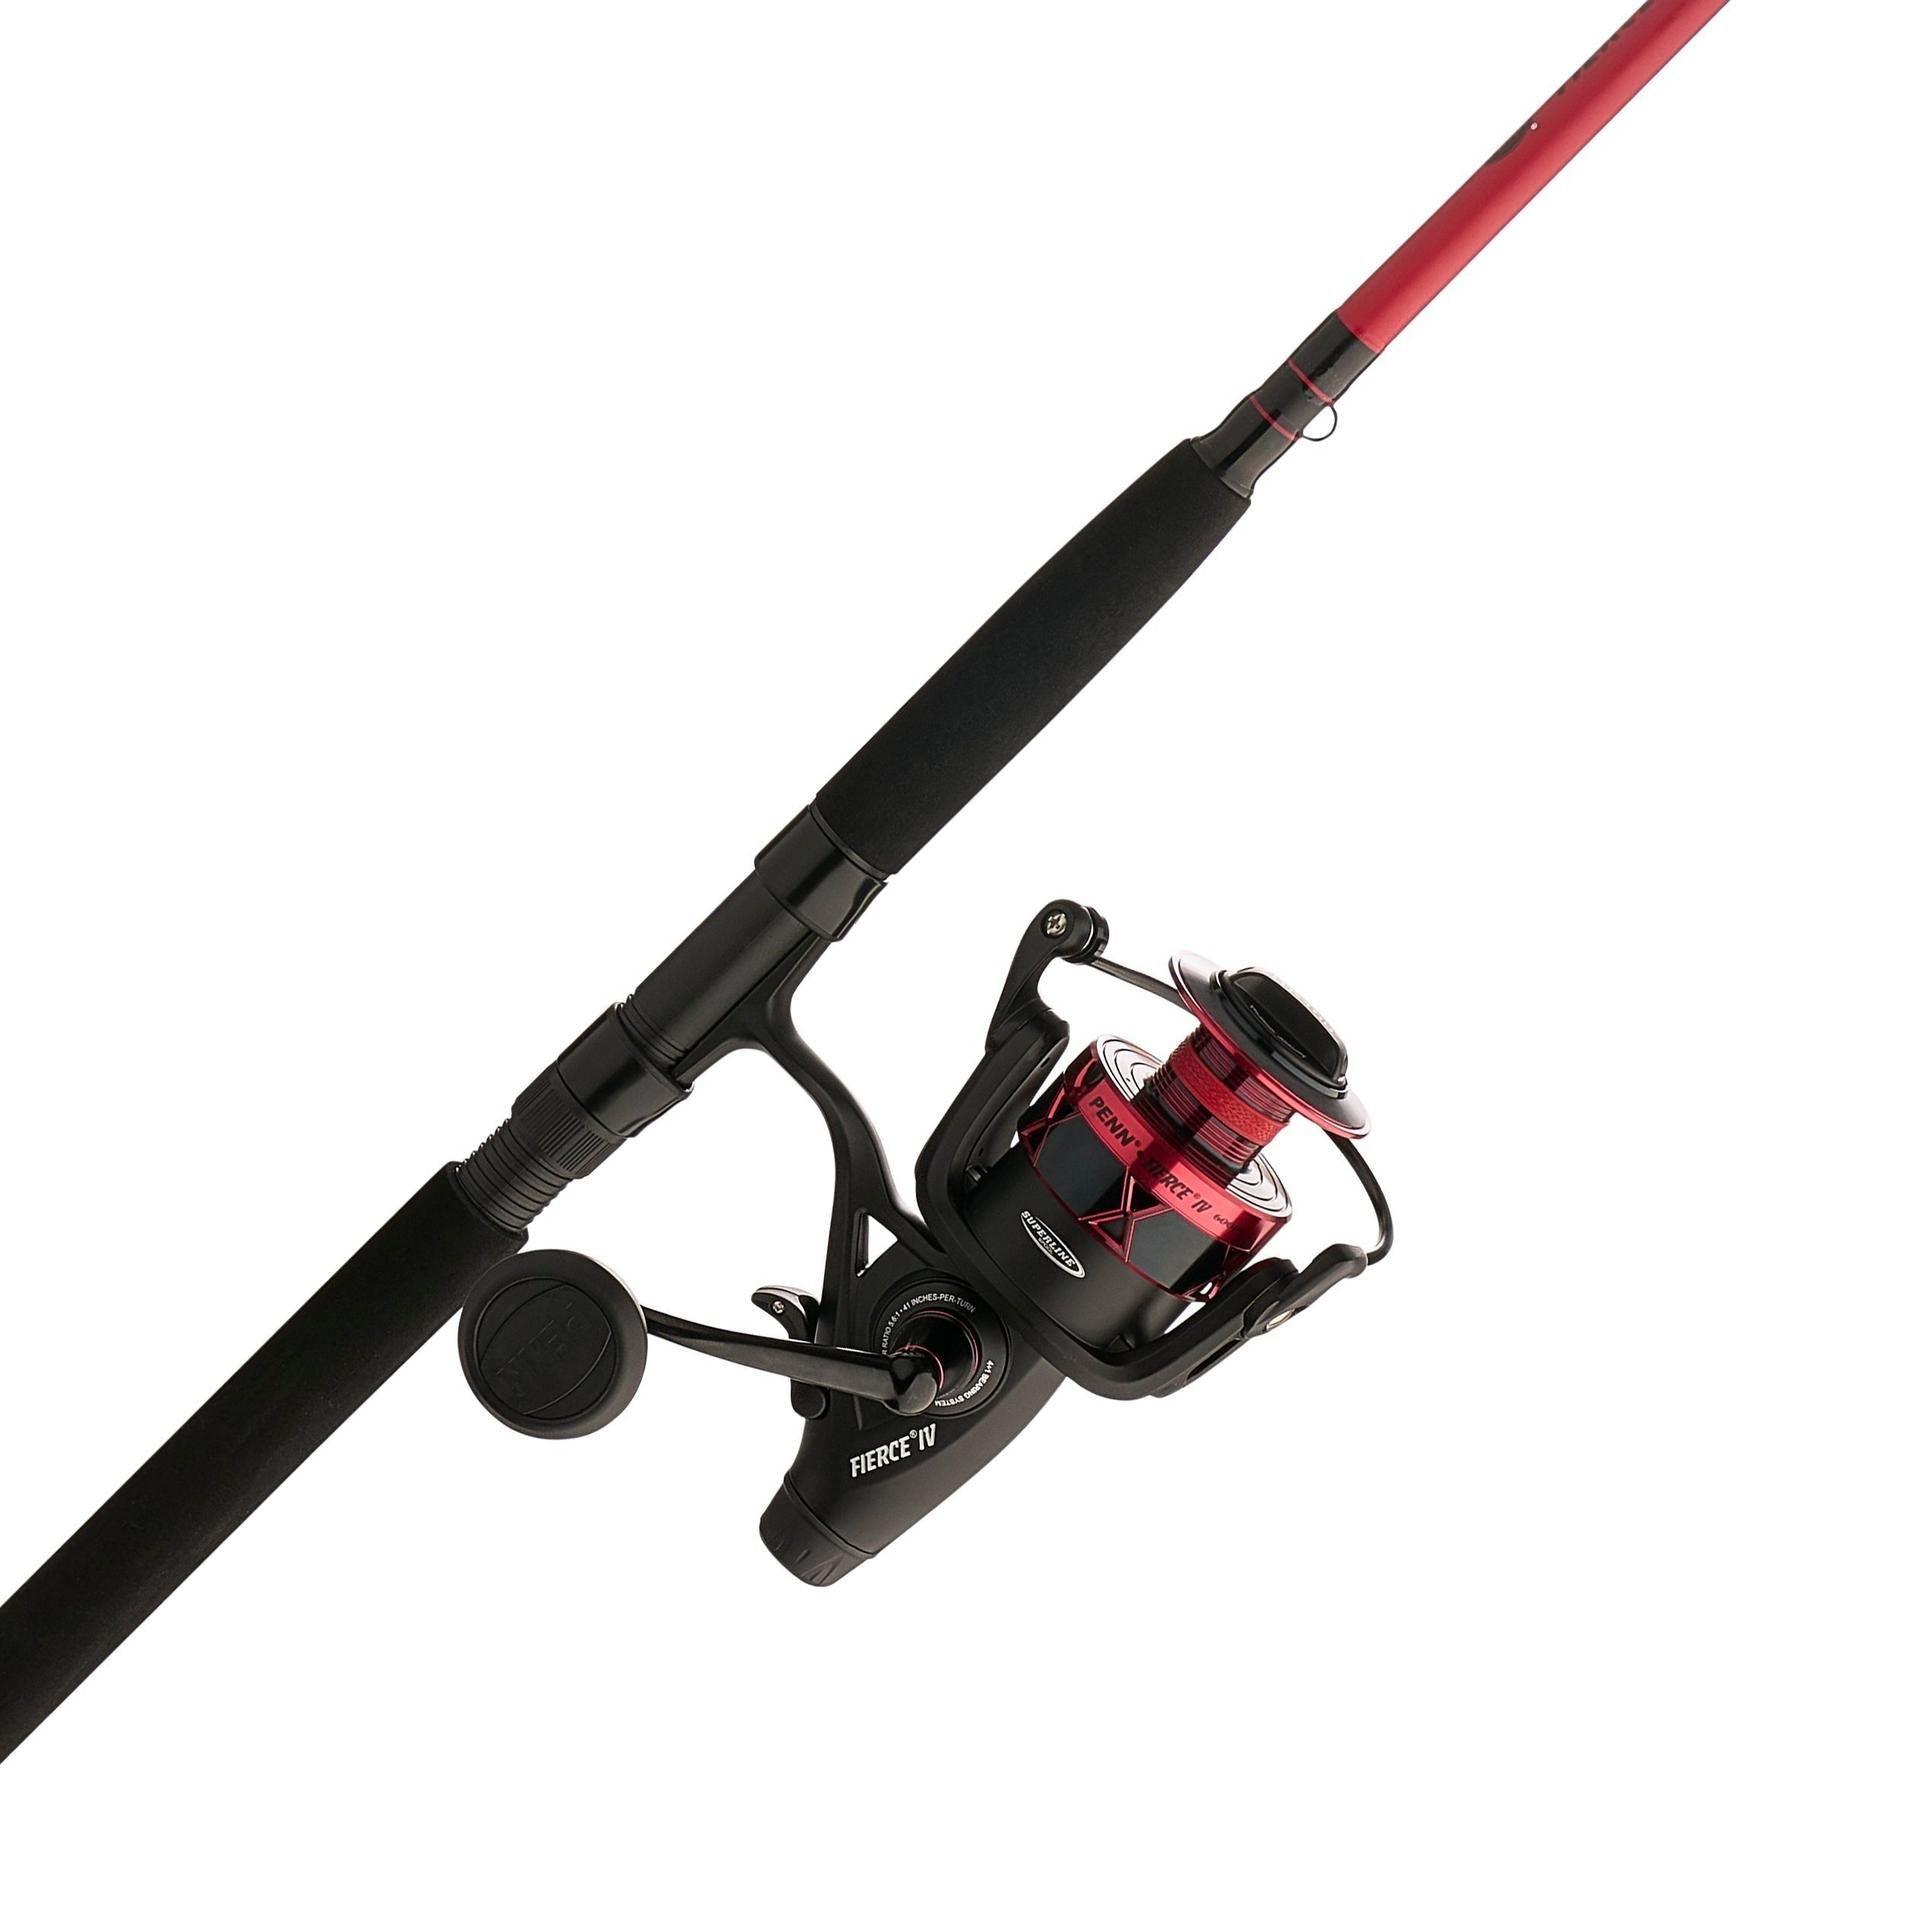  PENN Prevail II 7' Inshore Spinning Rod; 1-Piece Fishing Rod,  10-17lb Line Rating, Medium Rod Power, Extra Fast Action, 1/4-1 oz. Lure  Rating, Black, Red : Sports & Outdoors